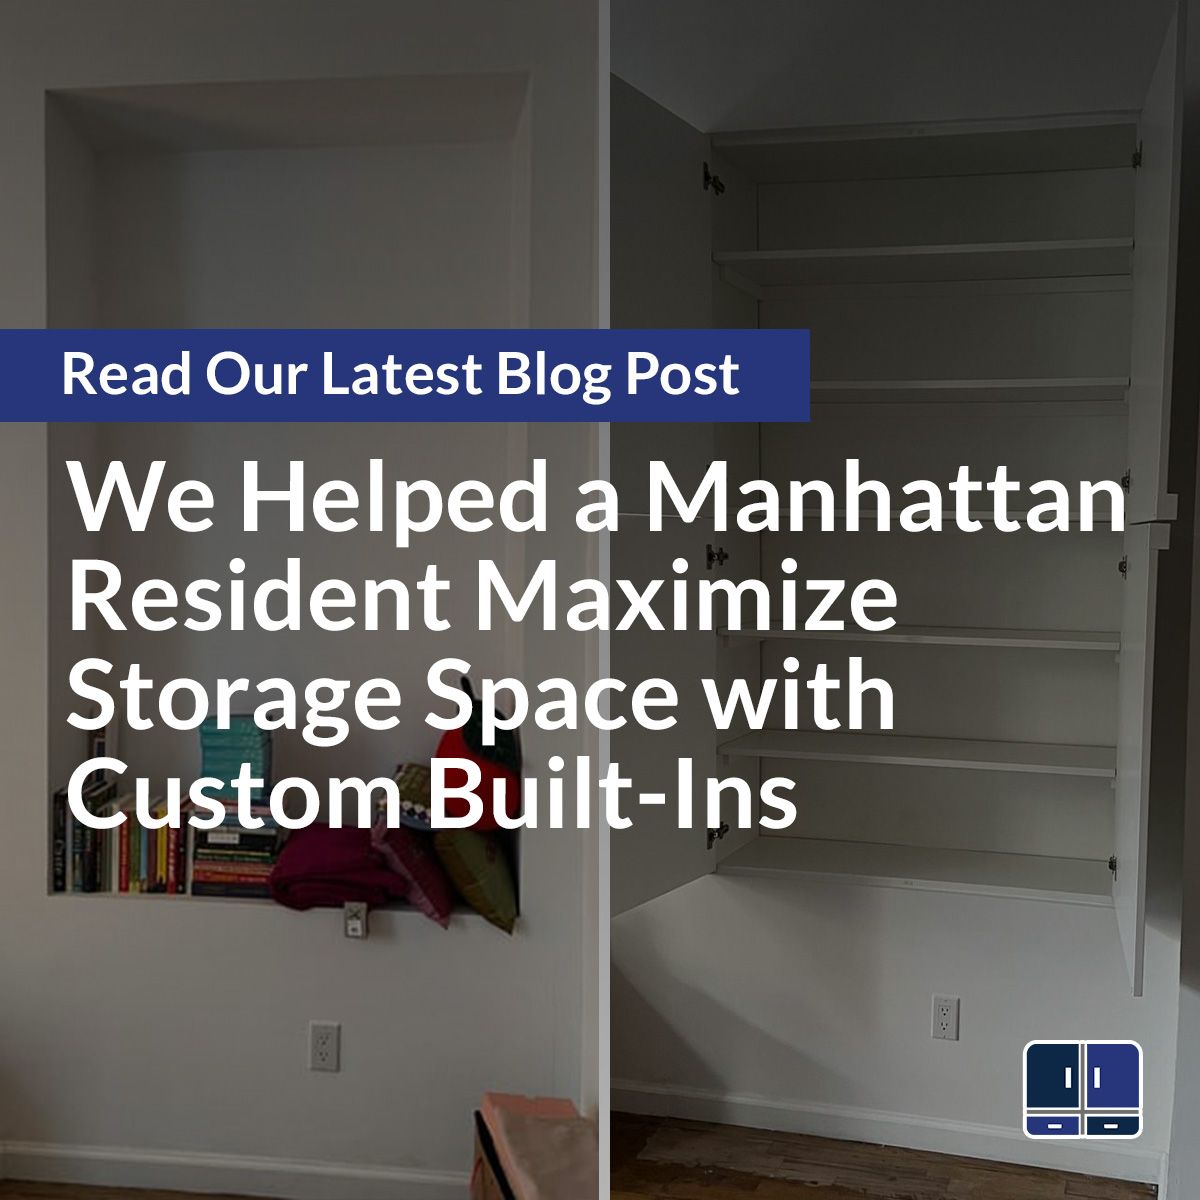 We Helped a Manhattan Resident Maximize Storage Space with Custom Built-Ins